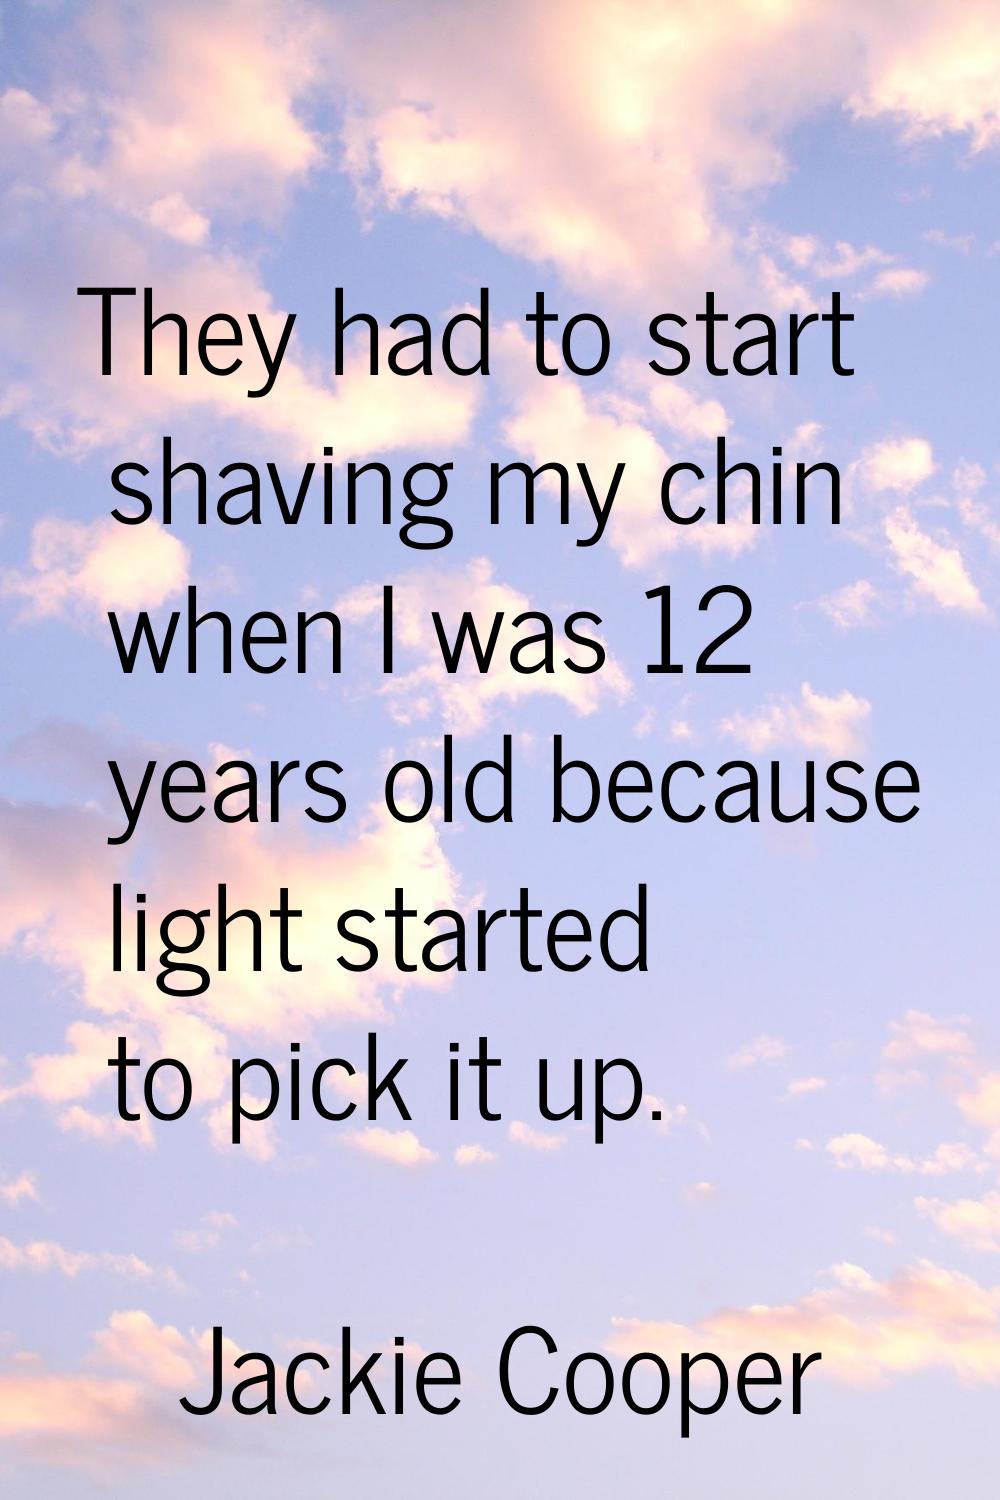 They had to start shaving my chin when I was 12 years old because light started to pick it up.